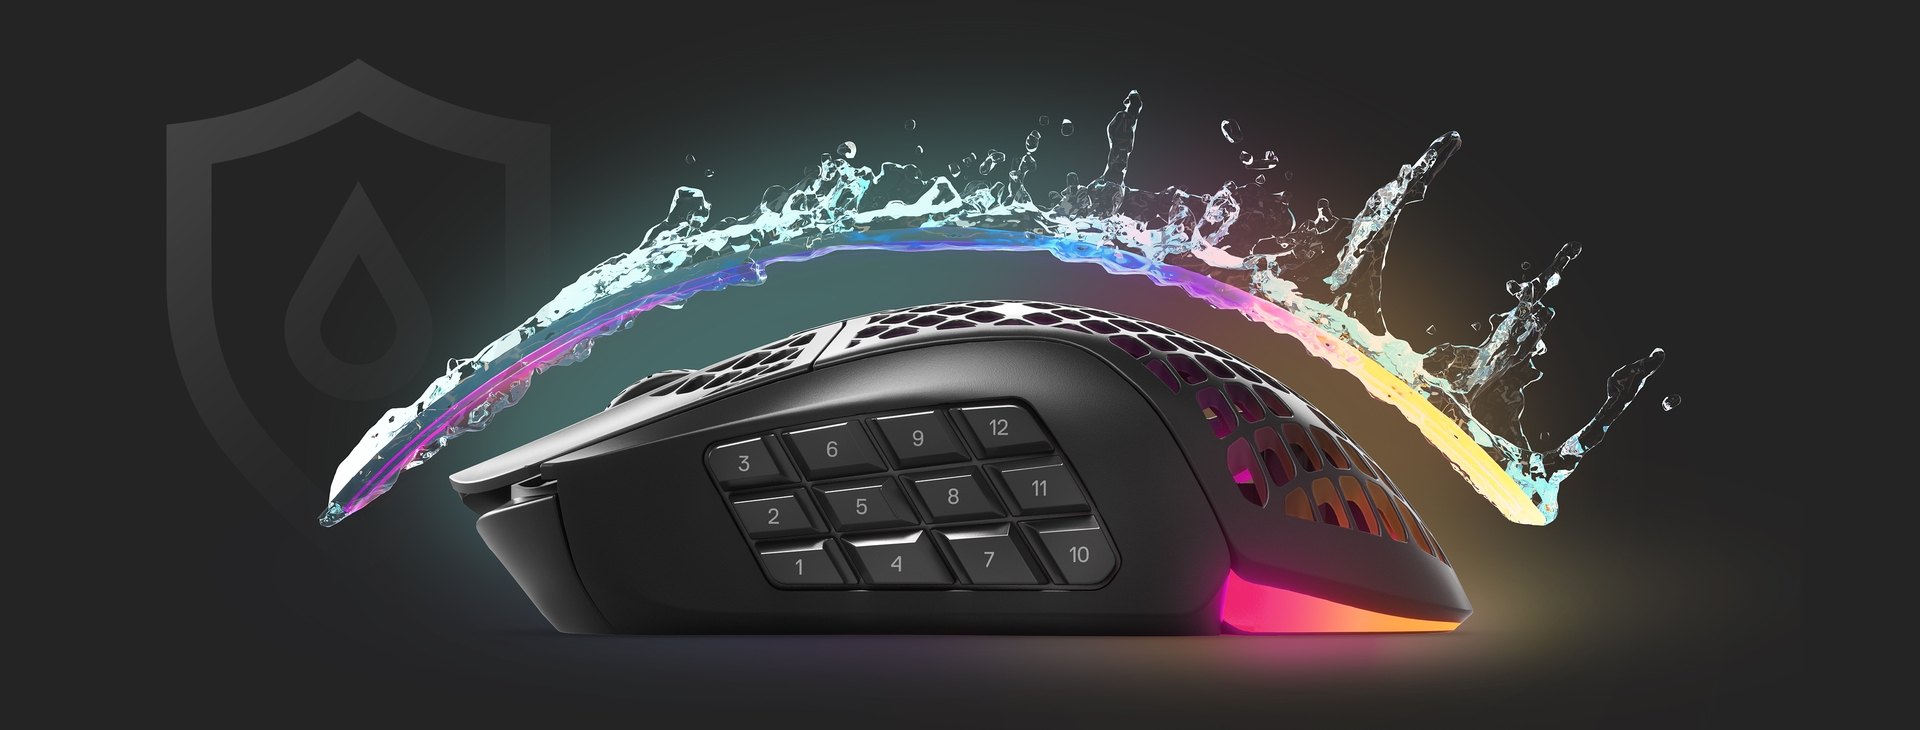 An Aerox 9 Wireless Ghost mouse with an invisible shield protecting it from incoming water splashing, to convey the waterproofing features.